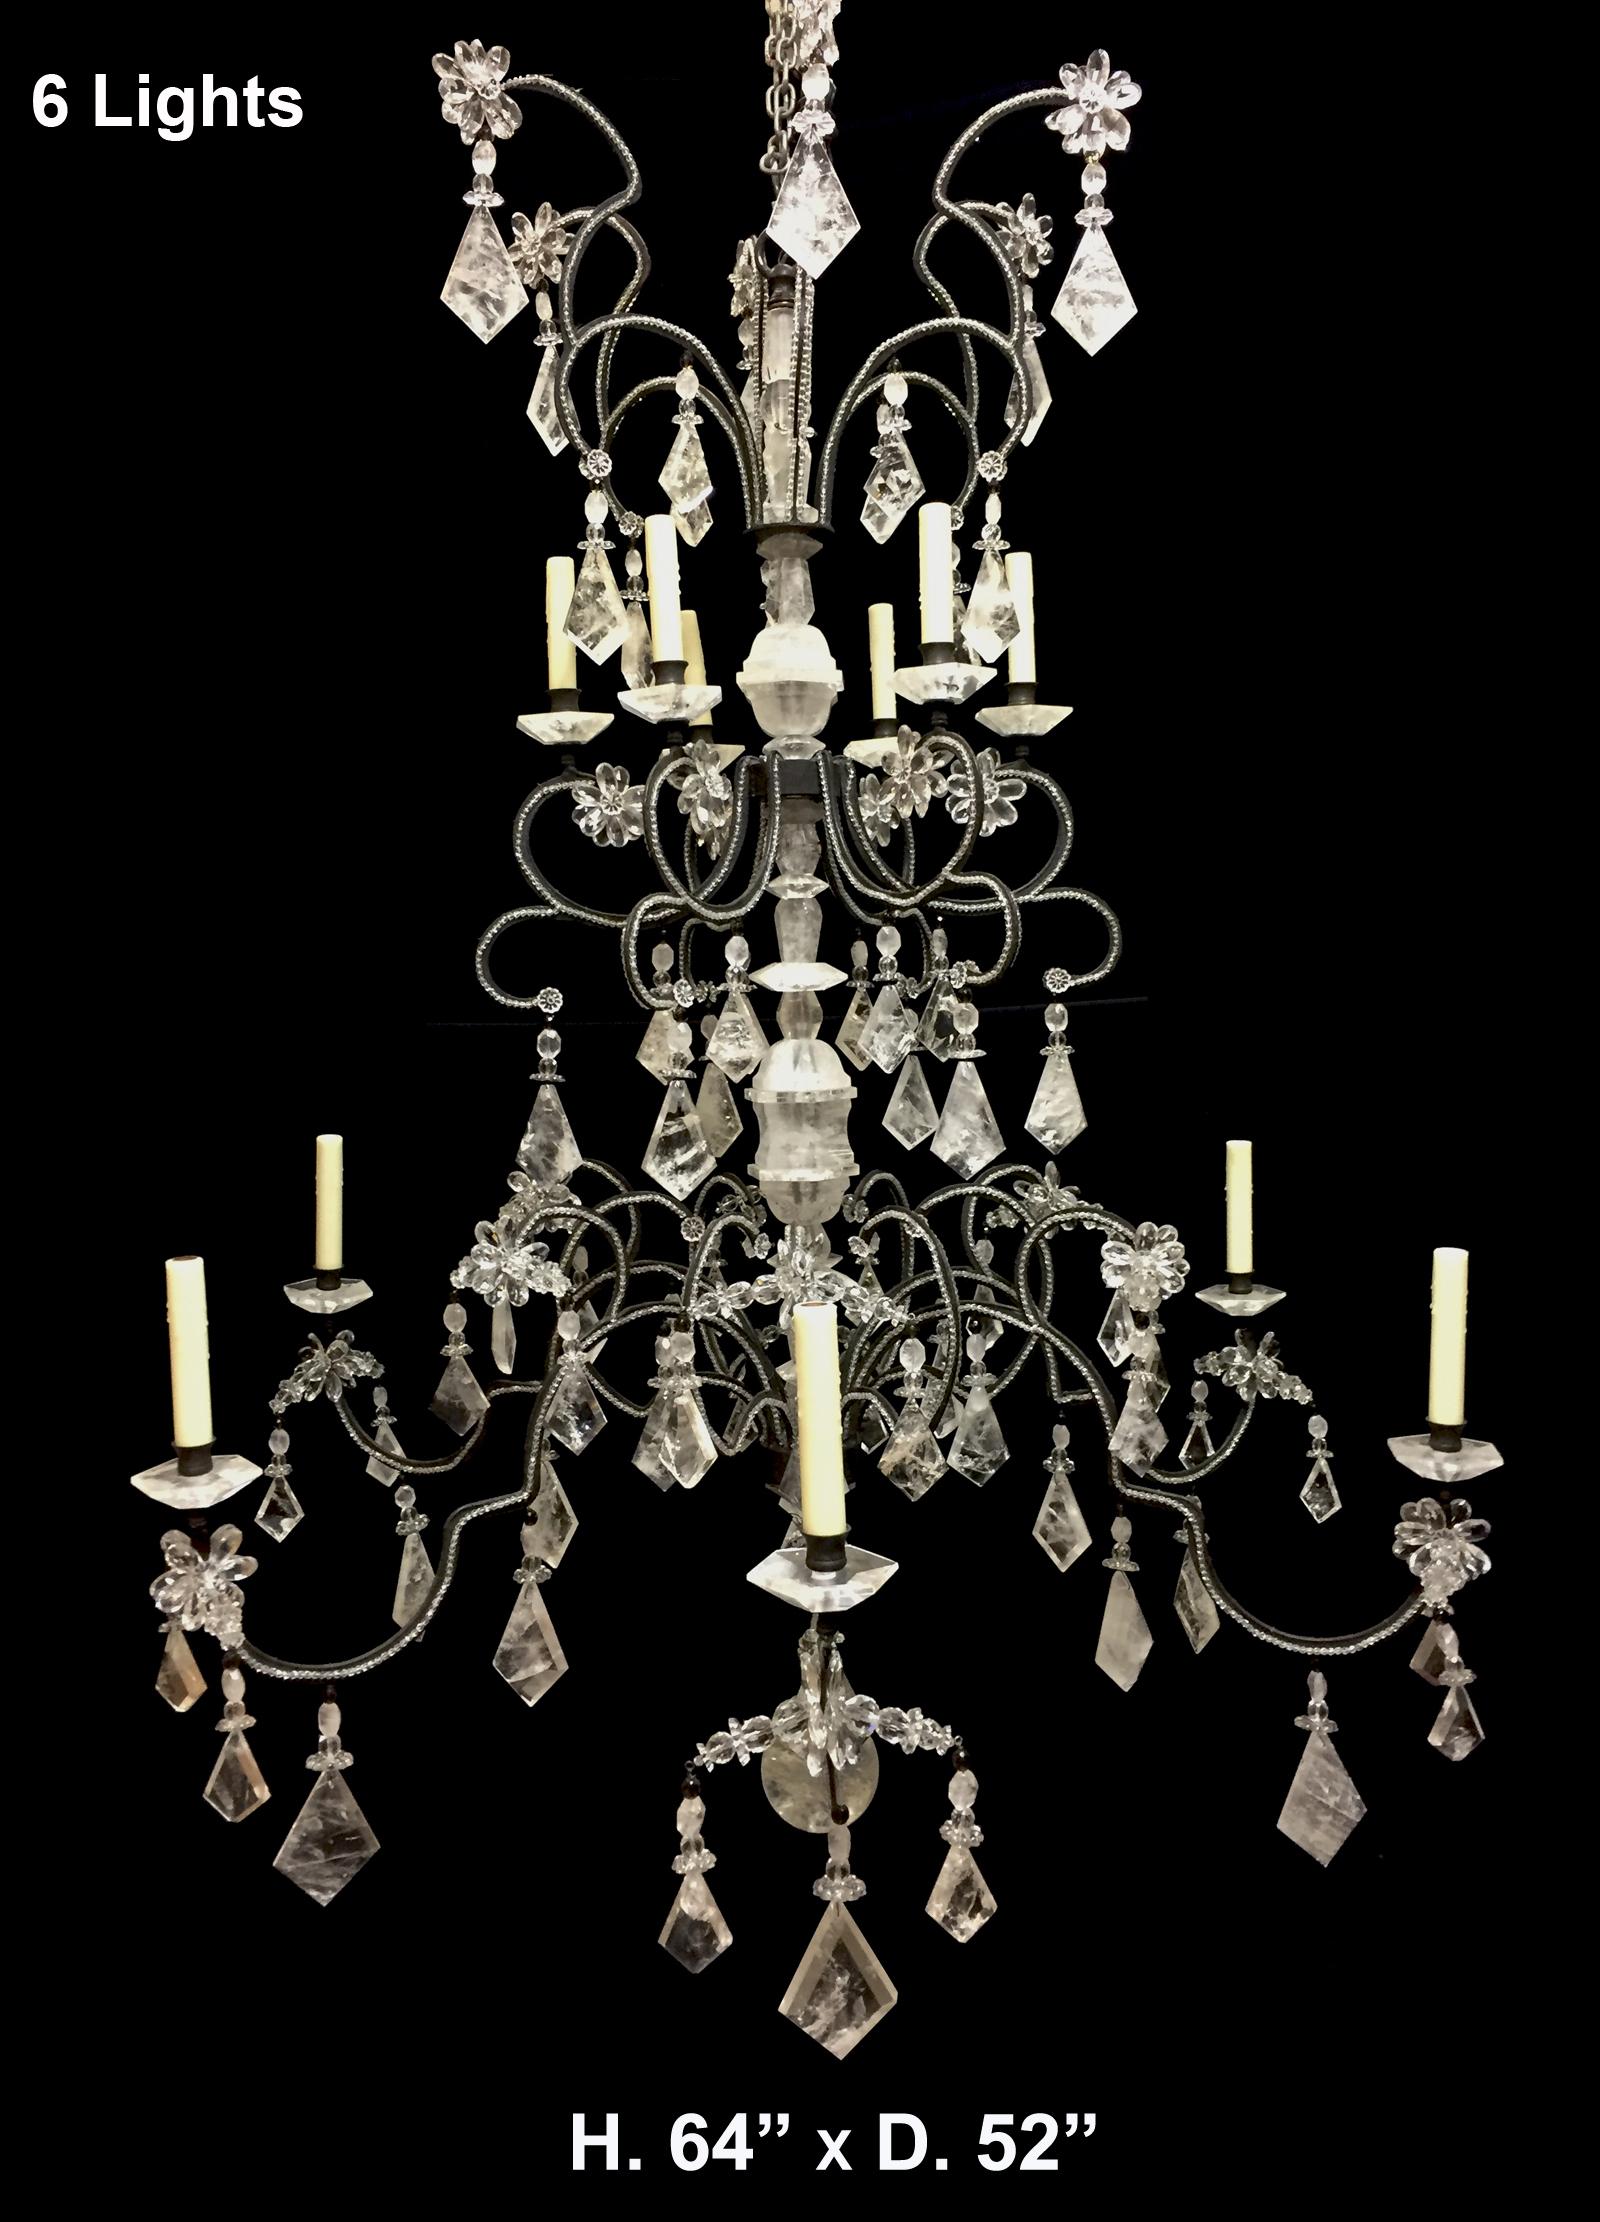 Hand-Carved Neoclassical Style Rock Crystal Twelve-Light Chandelier For Sale